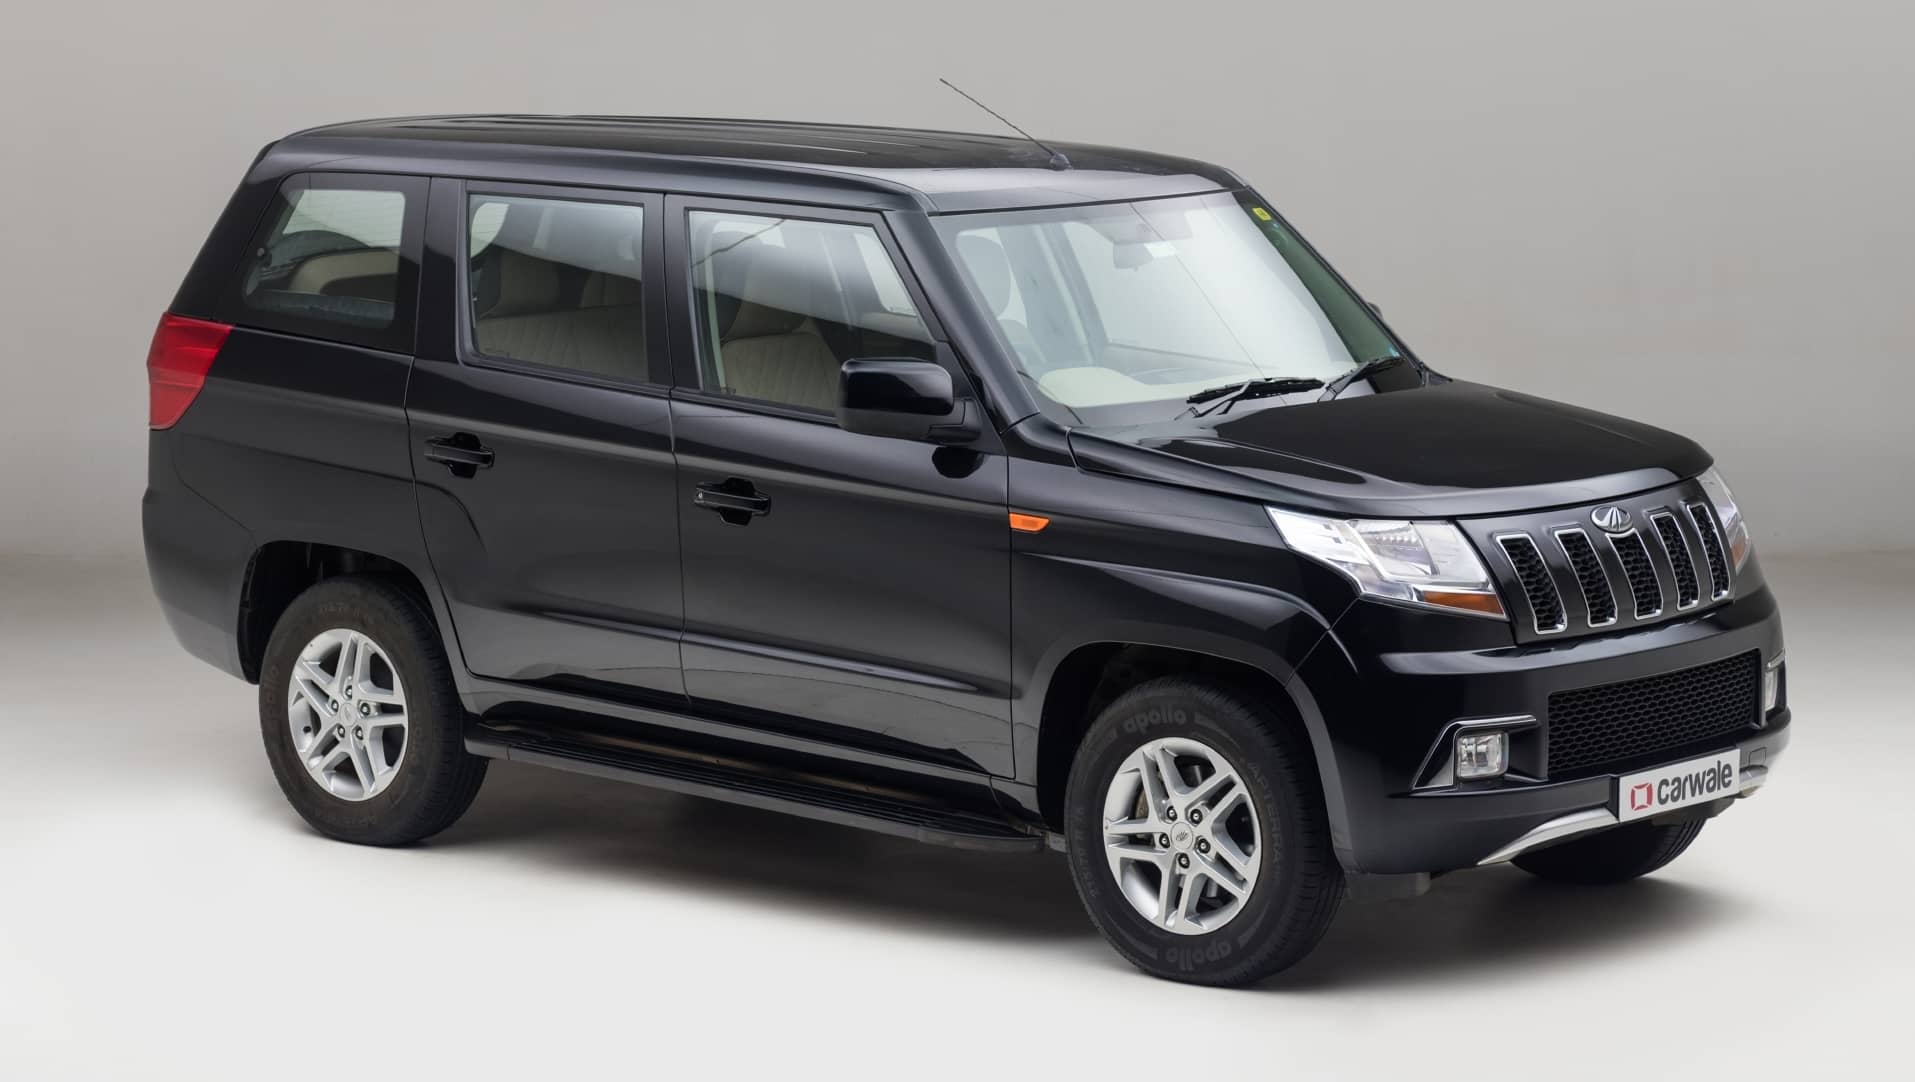 Landy Car Price In India / A wide variety of india car sale options are